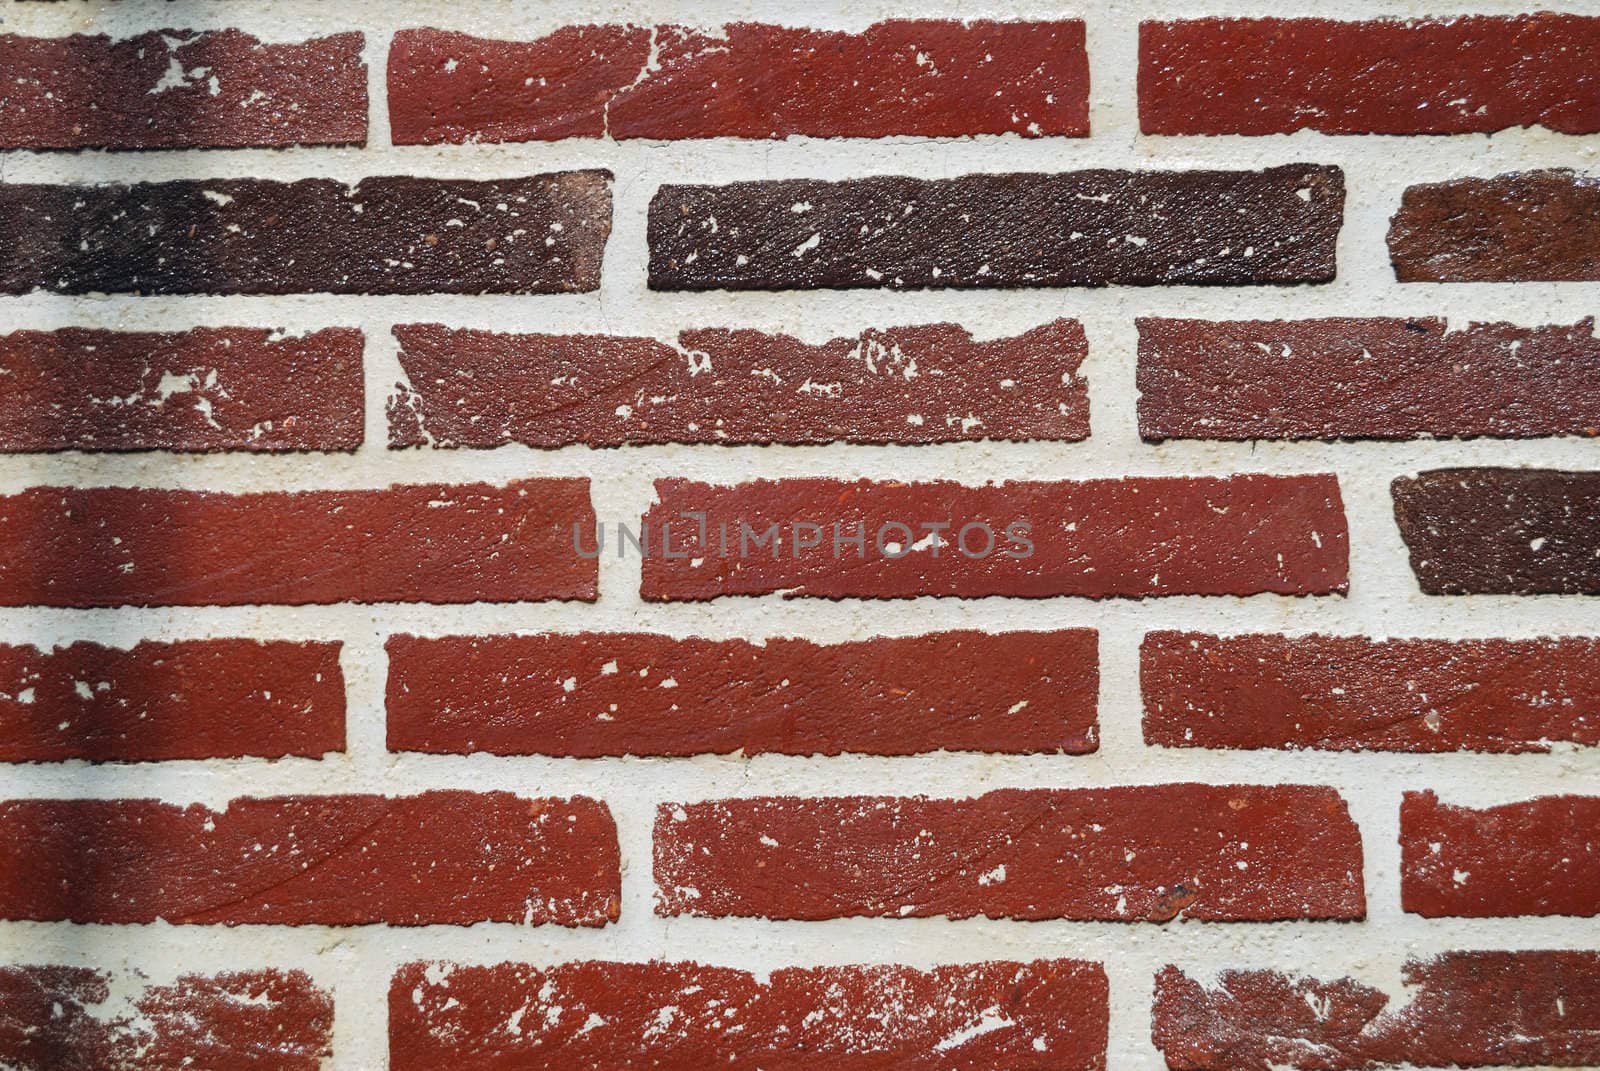 wall from a red bricks